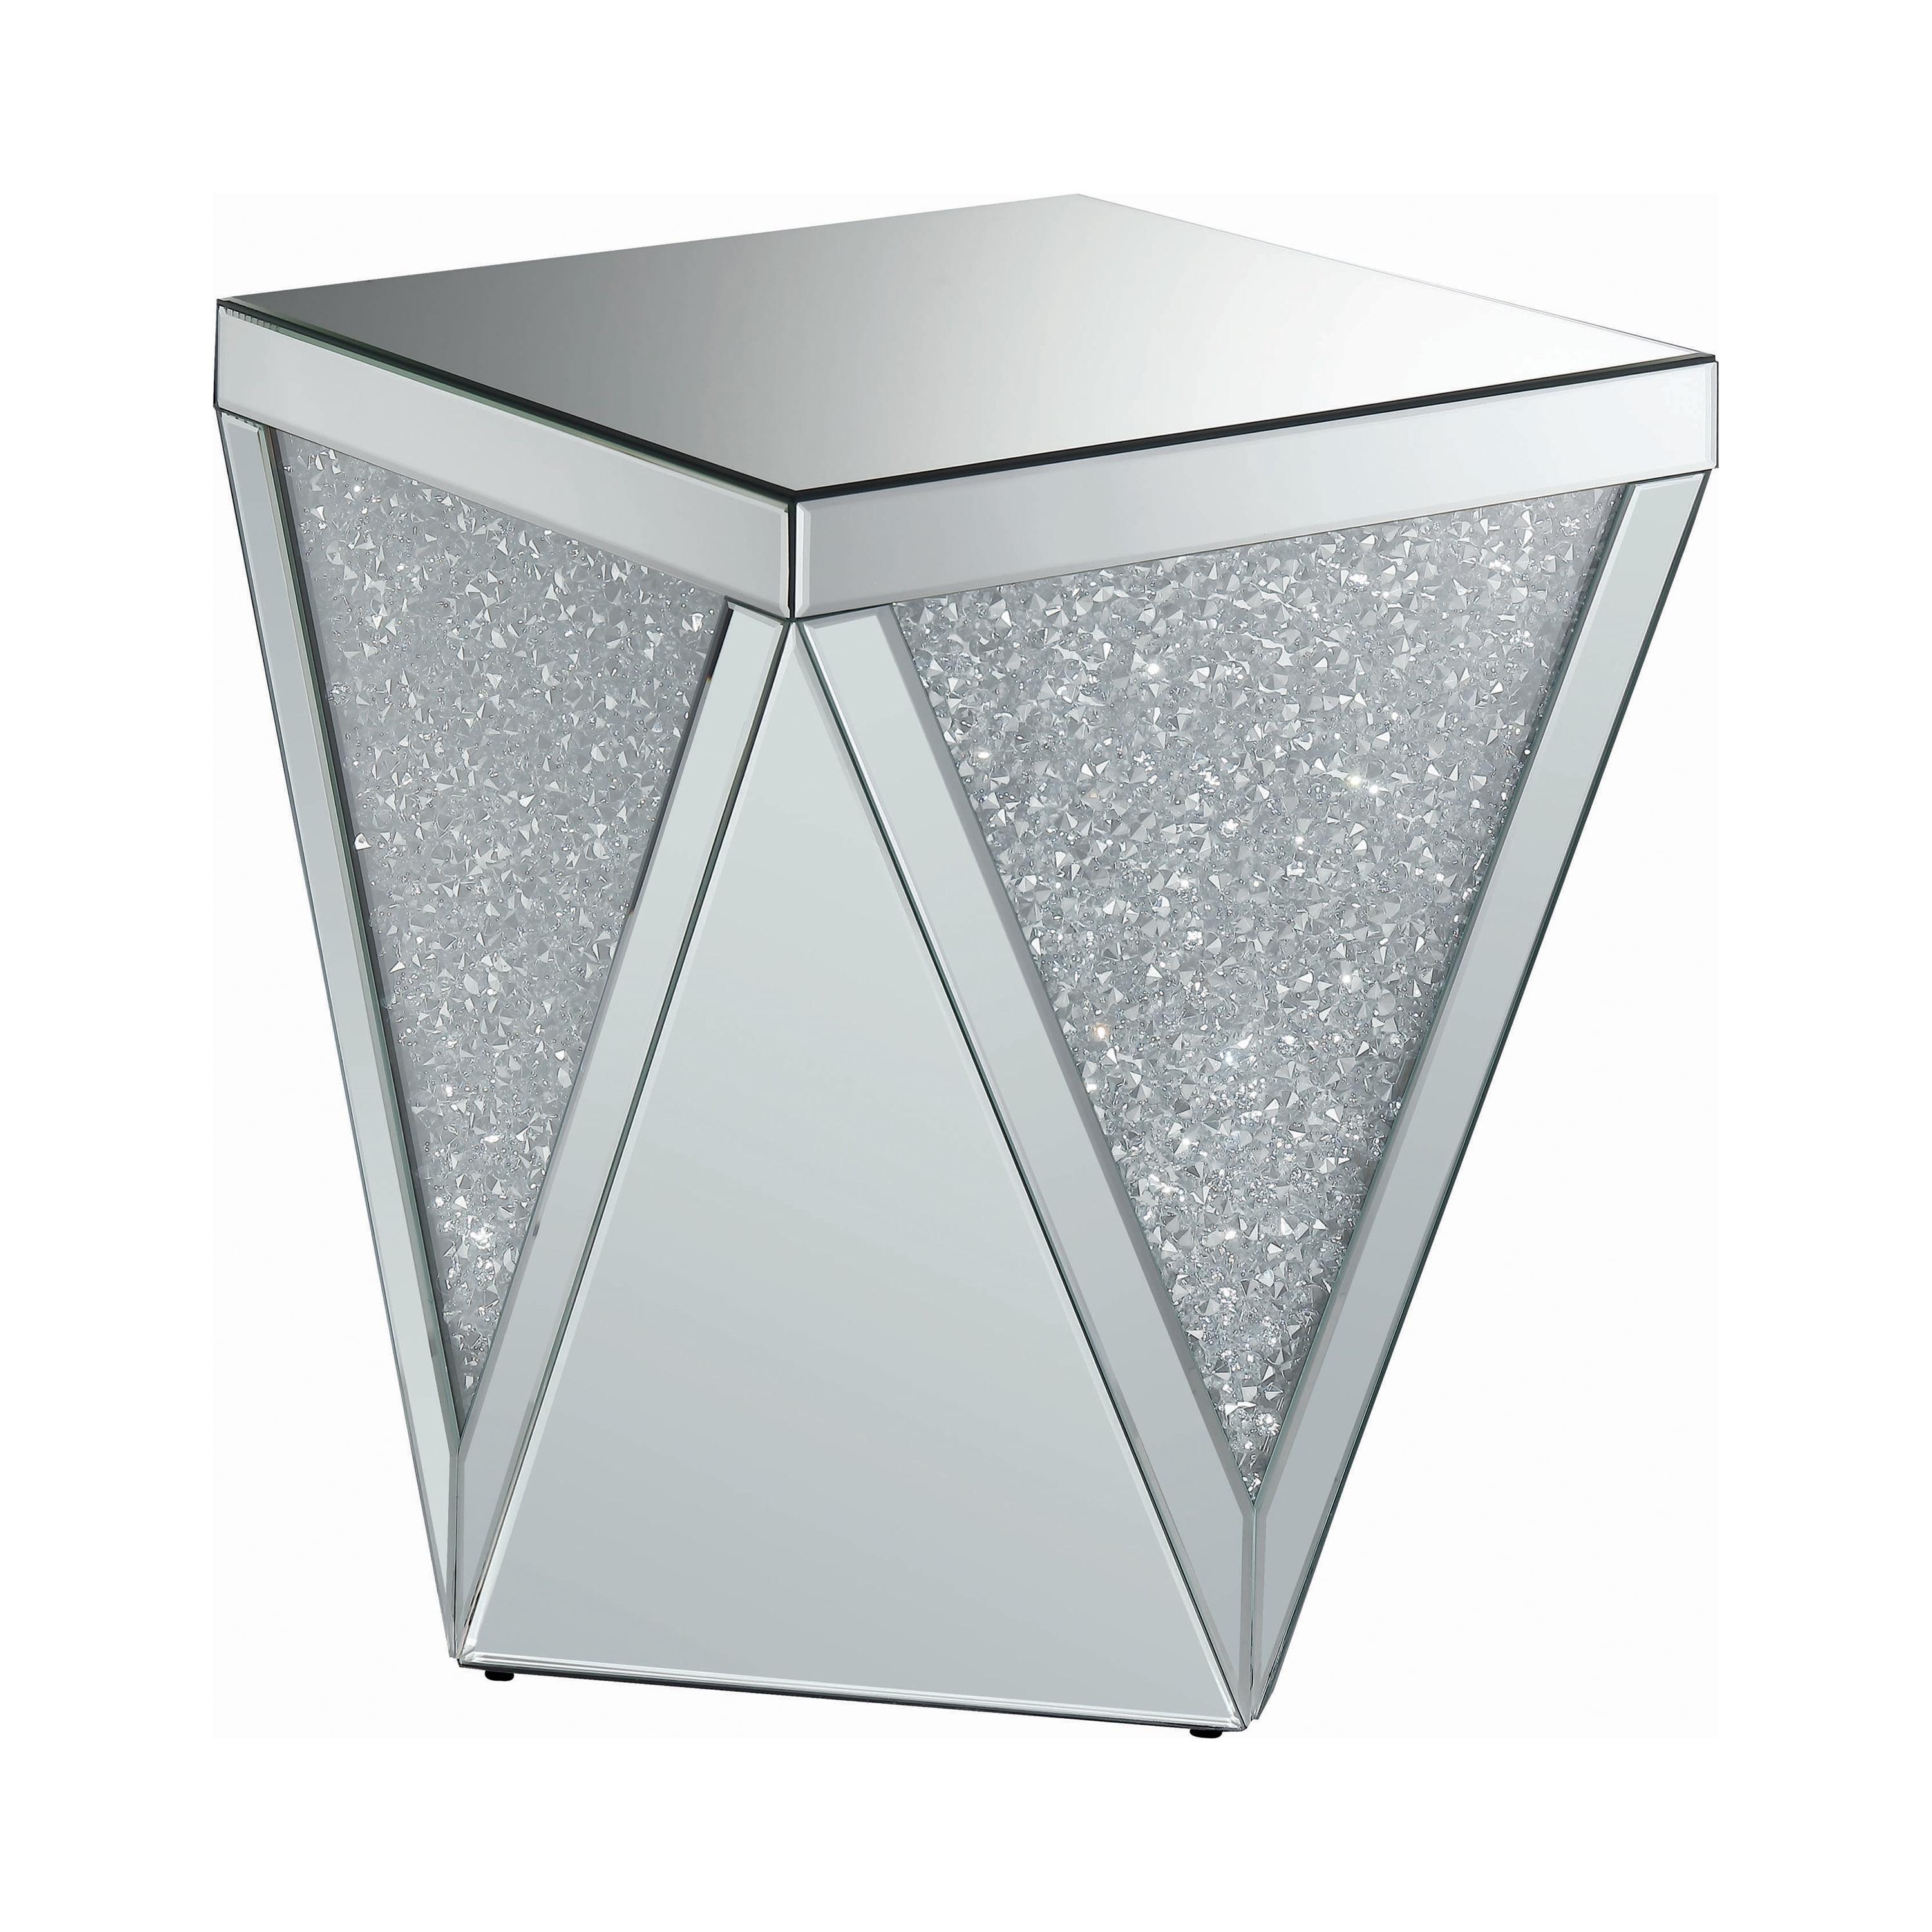 Contemporary Silver Mirrored Square End Table with Triangular Detailing